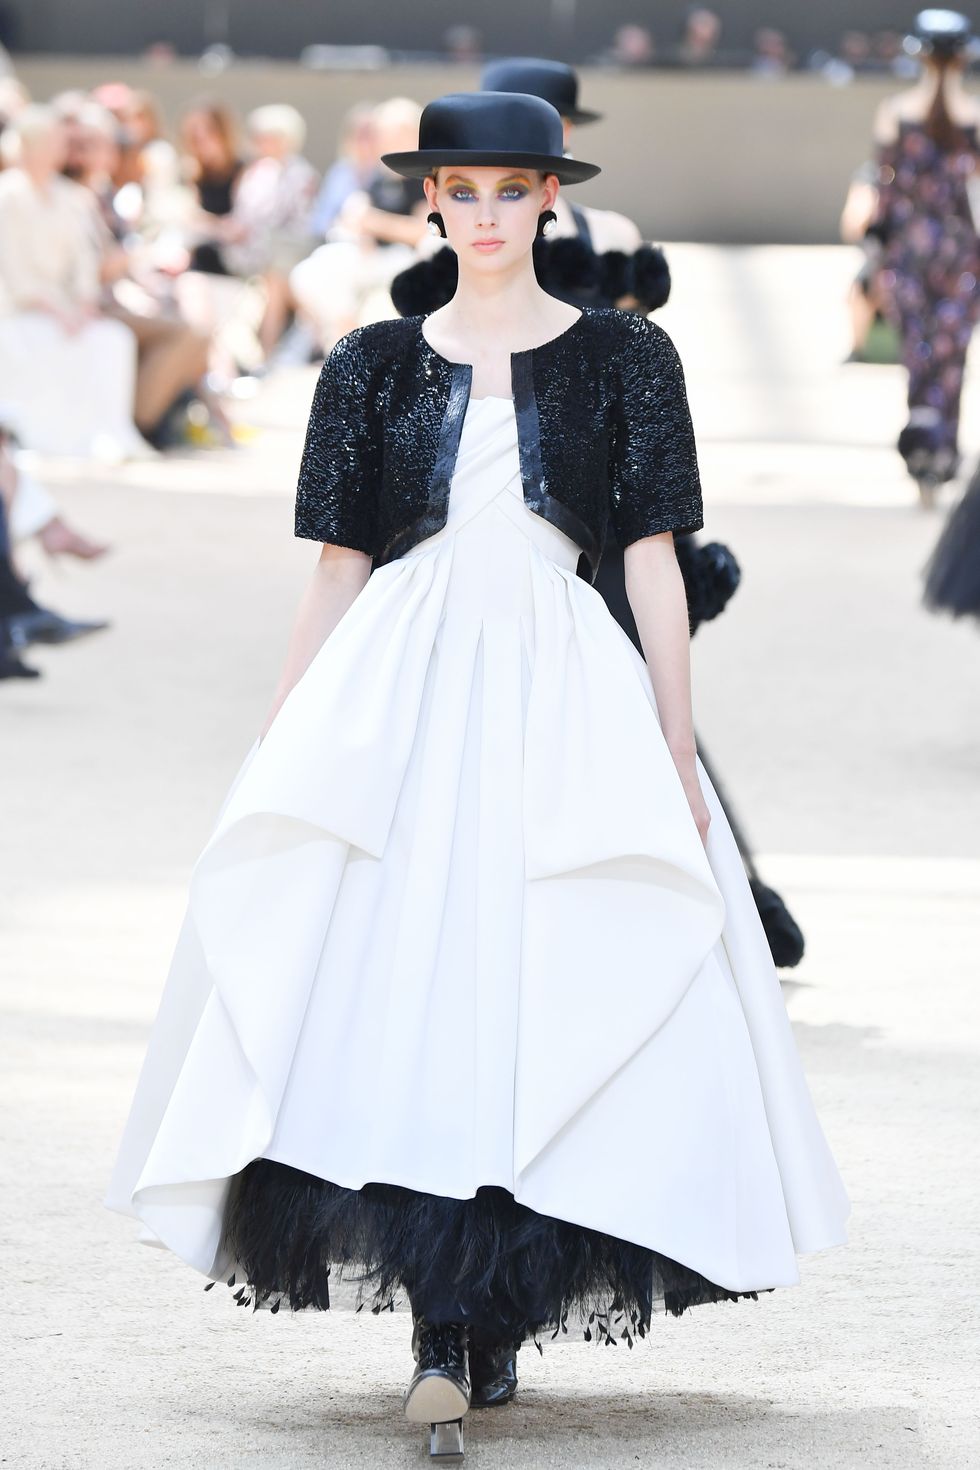 PARIS, FRANCE - JULY 04:  A model walks the runway during the Chanel Haute Couture Fall/Winter 2017-2018 show as part of Haute Couture Paris Fashion Week on July 4, 2017 in Paris, France.  (Photo by Stephane Cardinale - Corbis/Corbis via Getty Images)